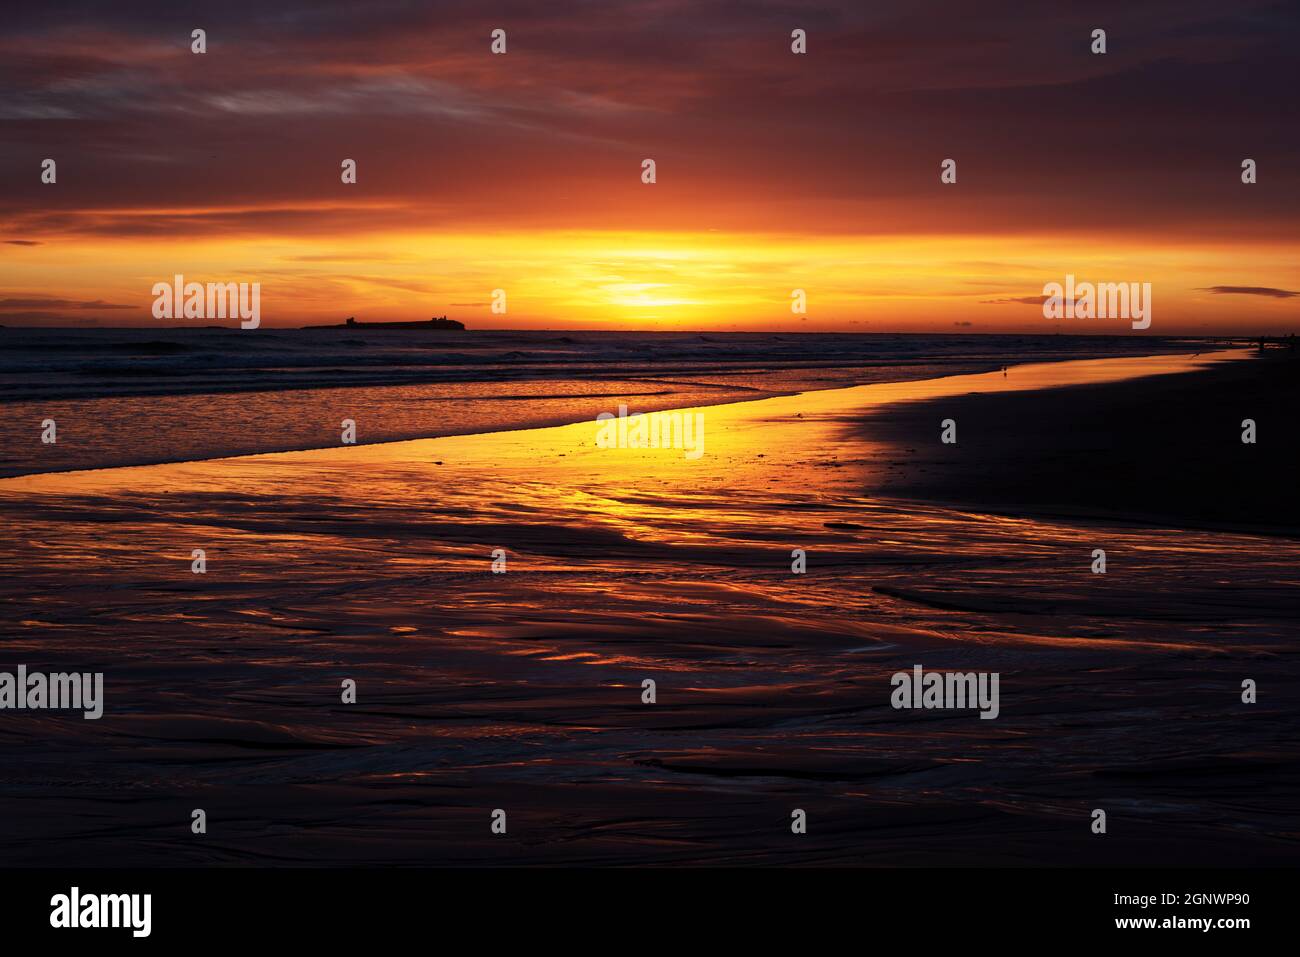 Bamburgh, Northumberland, UK. 28th Sep 2021. The sunrise over the Farne Islands from Bamburgh beach, Northumberland. Neil Squires/Alamy Live News Stock Photo